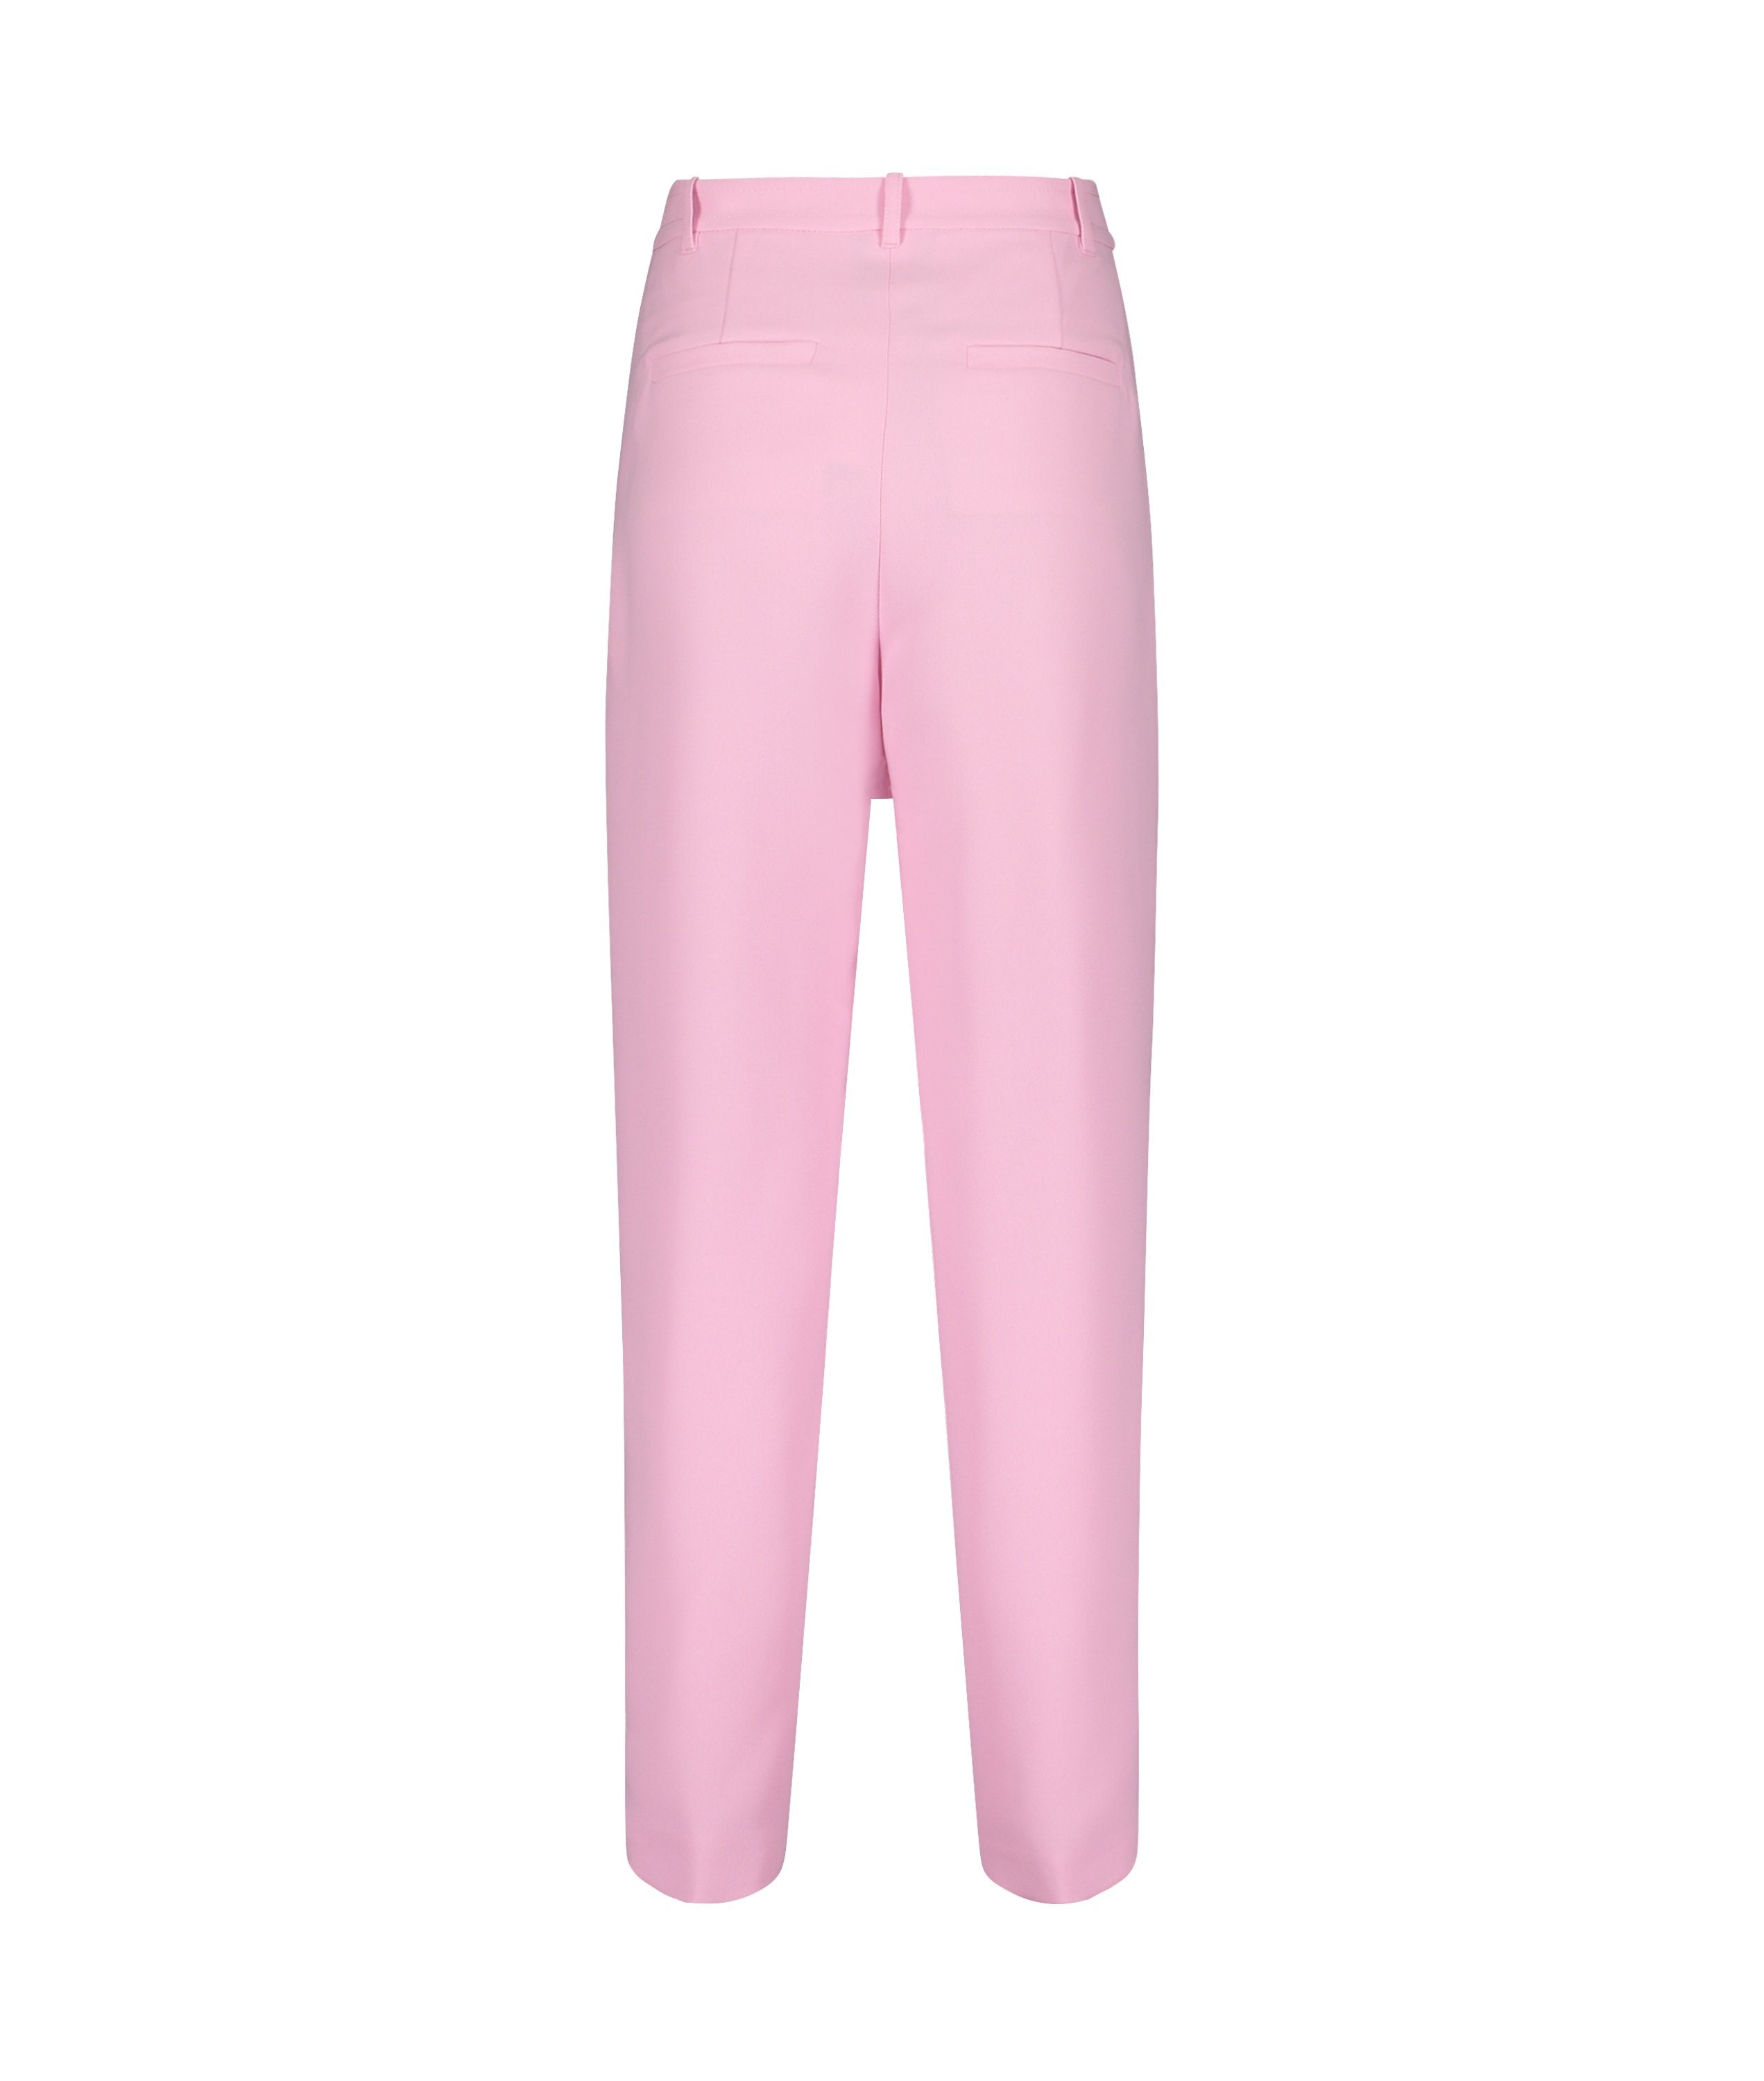 Myyiat Trousers - Lilac